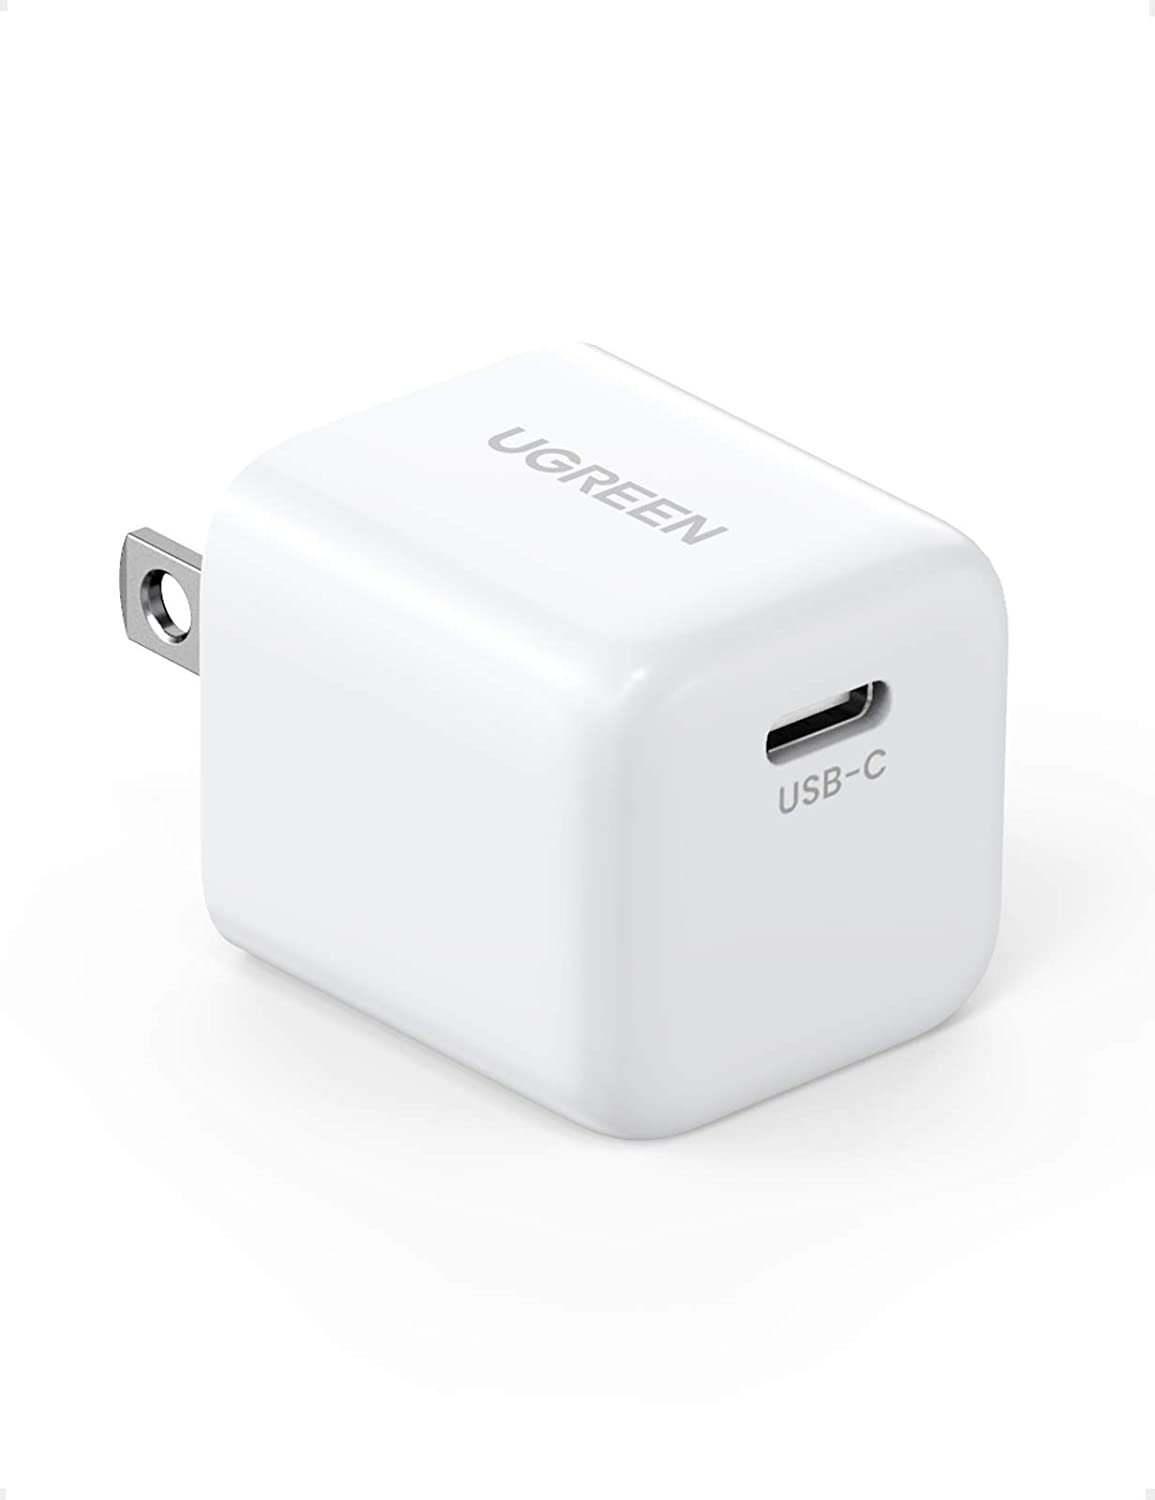 UGREEN Mini 20W PD Fast Wall Charger $6.49 + Free Shipping w/ Amazon Prime or Orders $25+